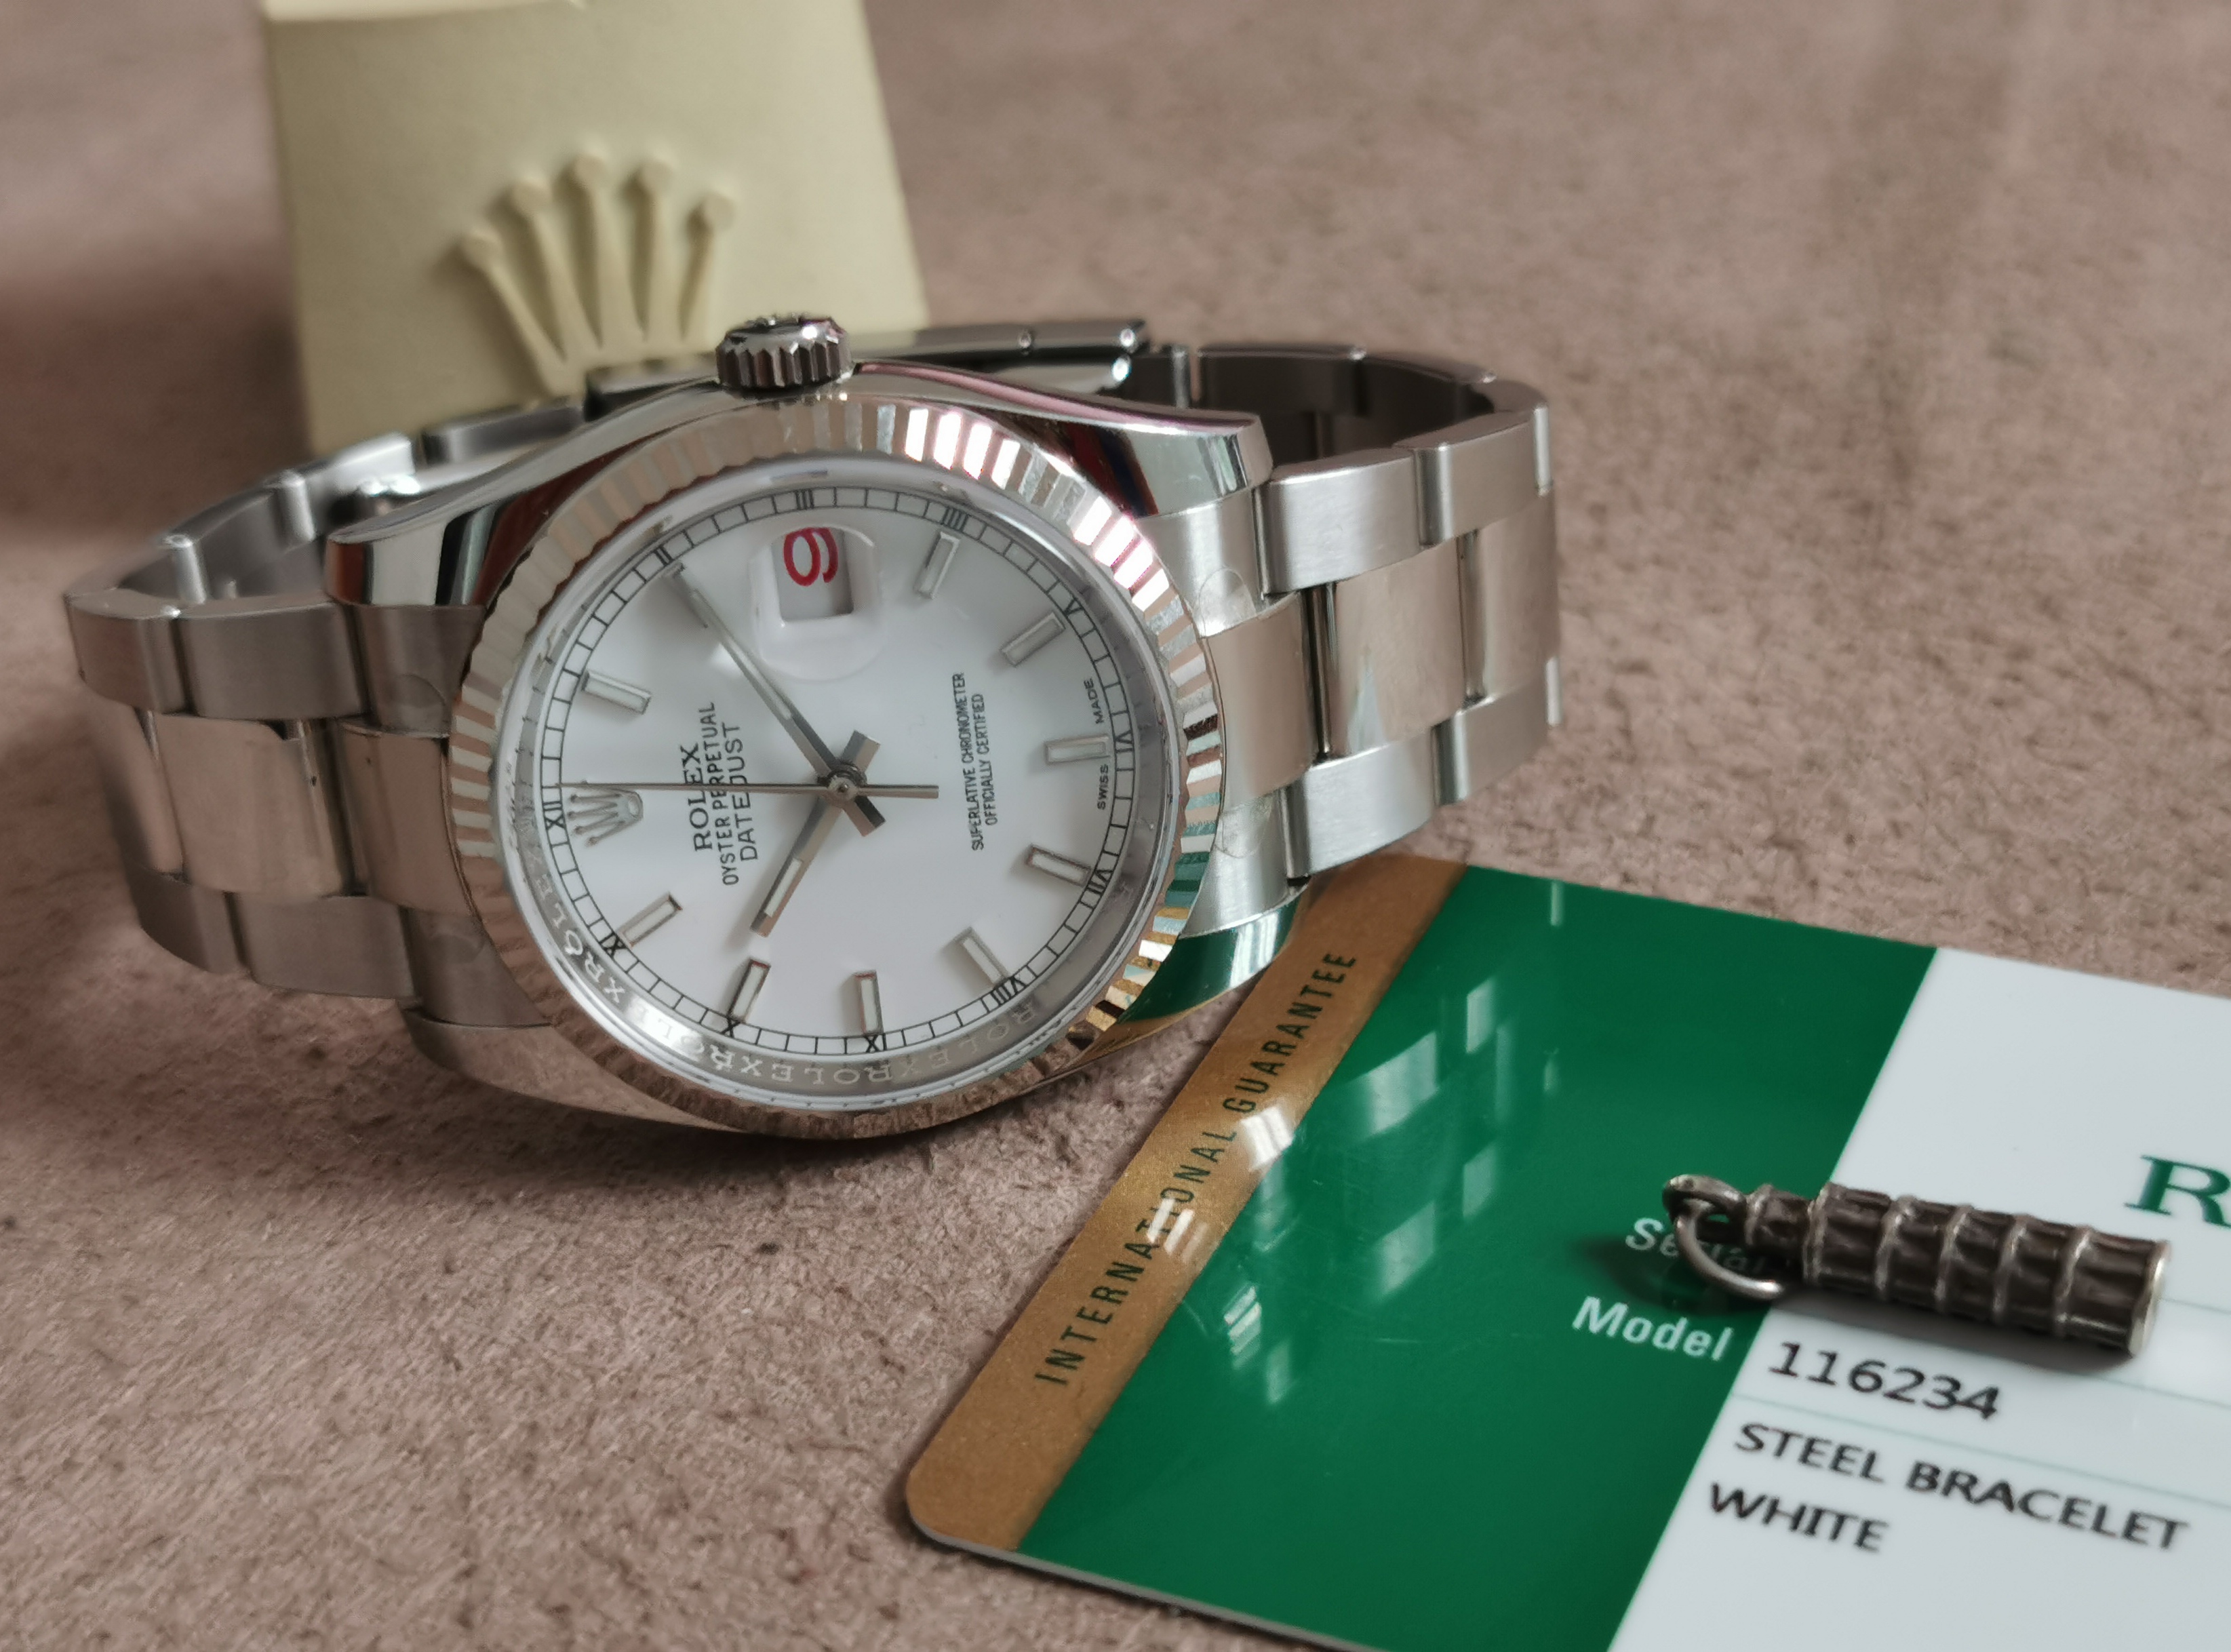 Rolex Datejust Datejust 36mm 116234 White Gold Bezel White Dial Oyster Bracelet Only Card 2019